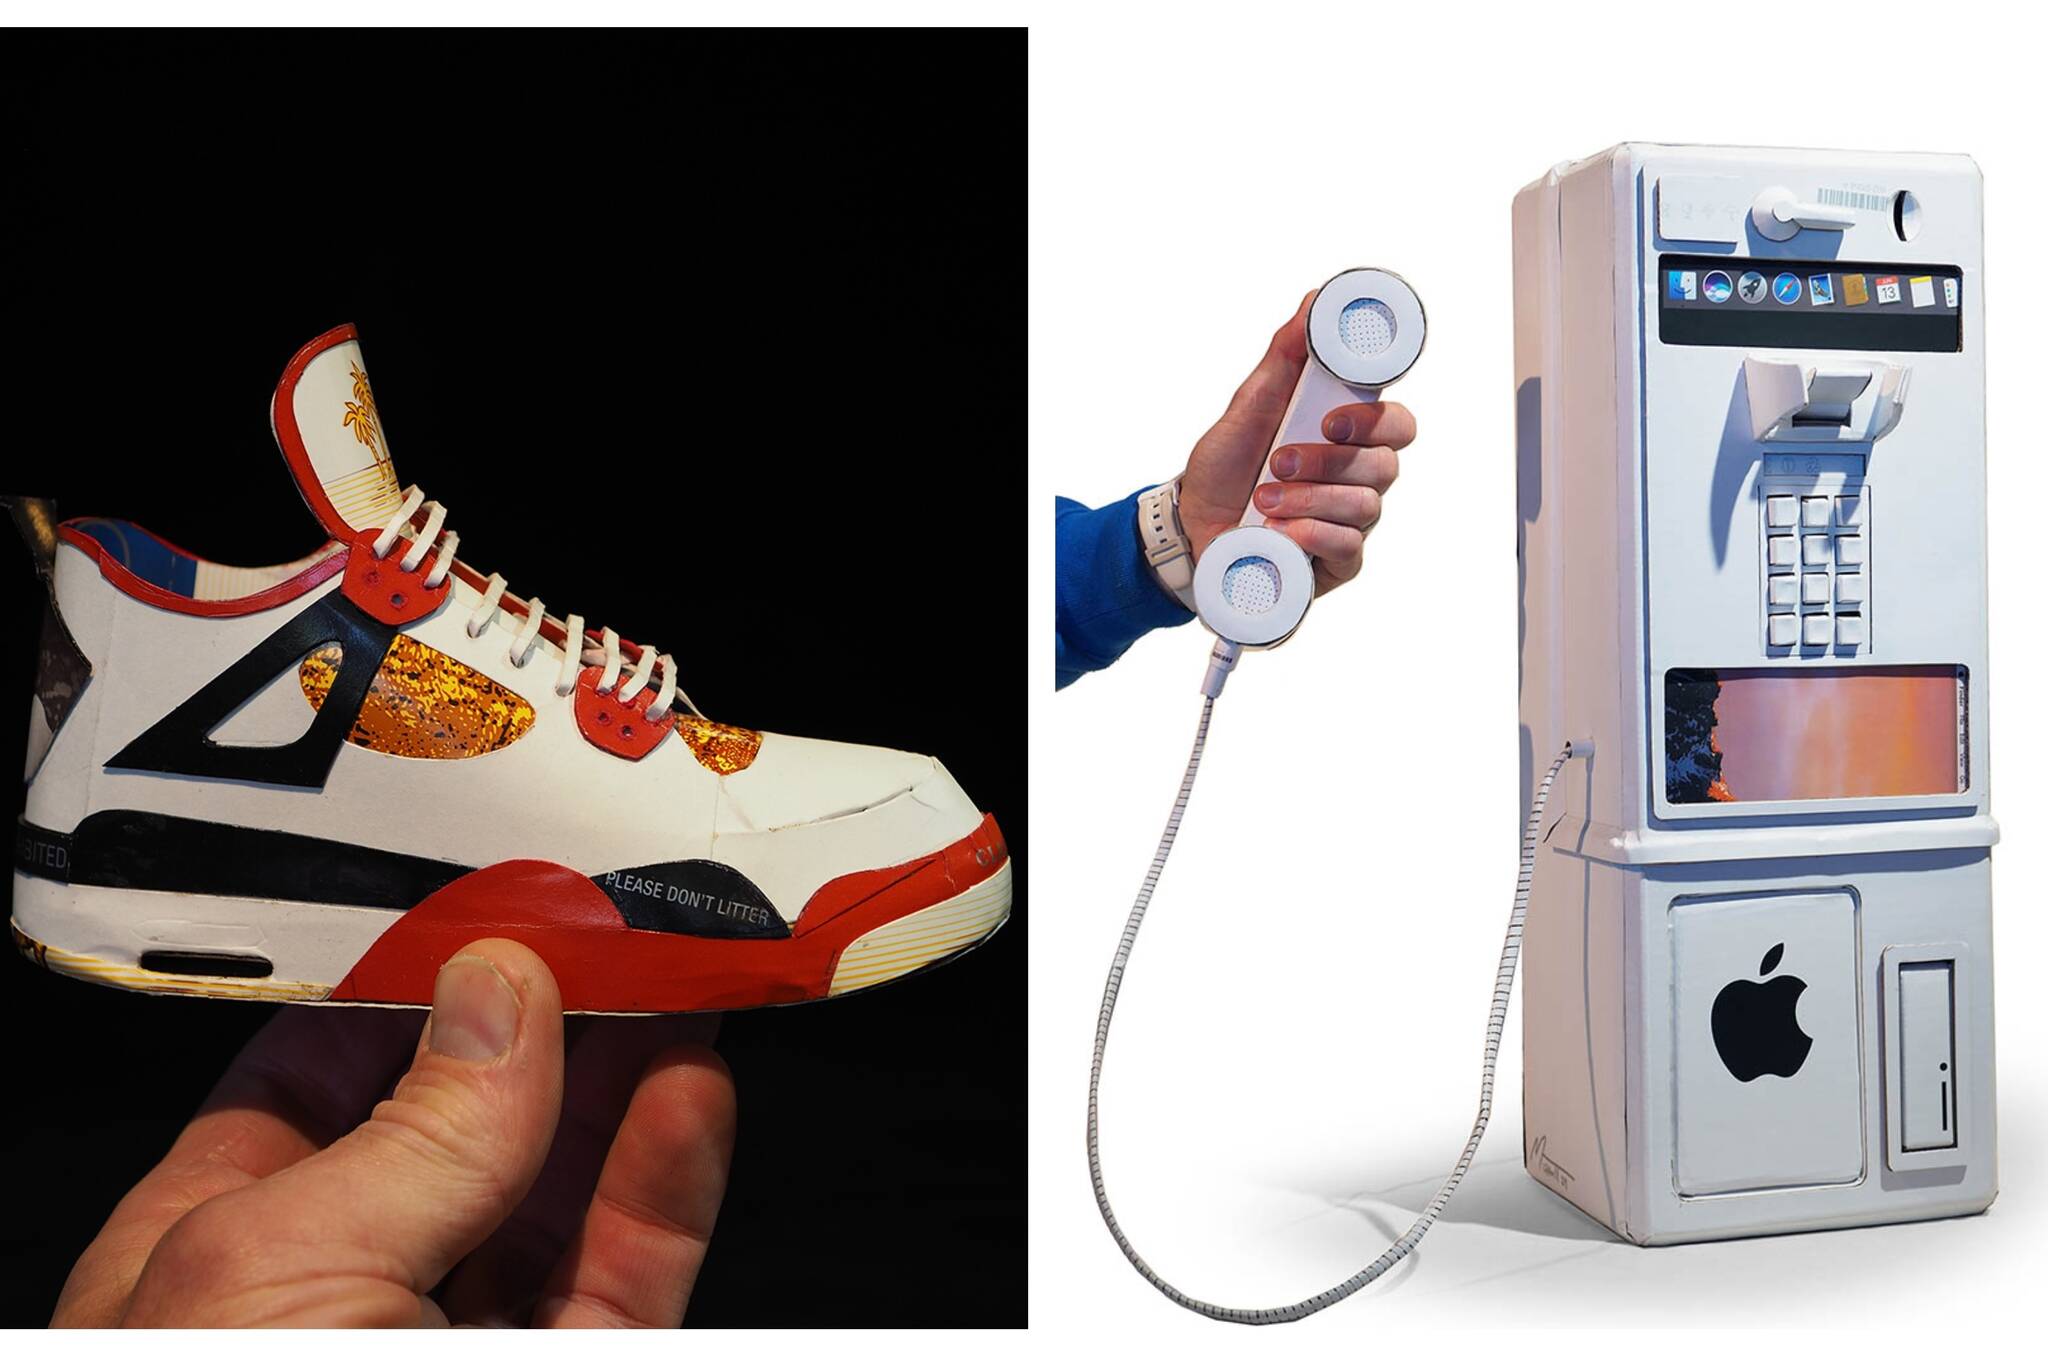 Mike Leavitt’s “Trash Talking” exhibits includes such works as a tiny Air Jordan sneaker constructed from cigarette packaging manufactured in North Carolina, and a old-school pay phone made from the packaging of Apple products. (Courtesy photos.)